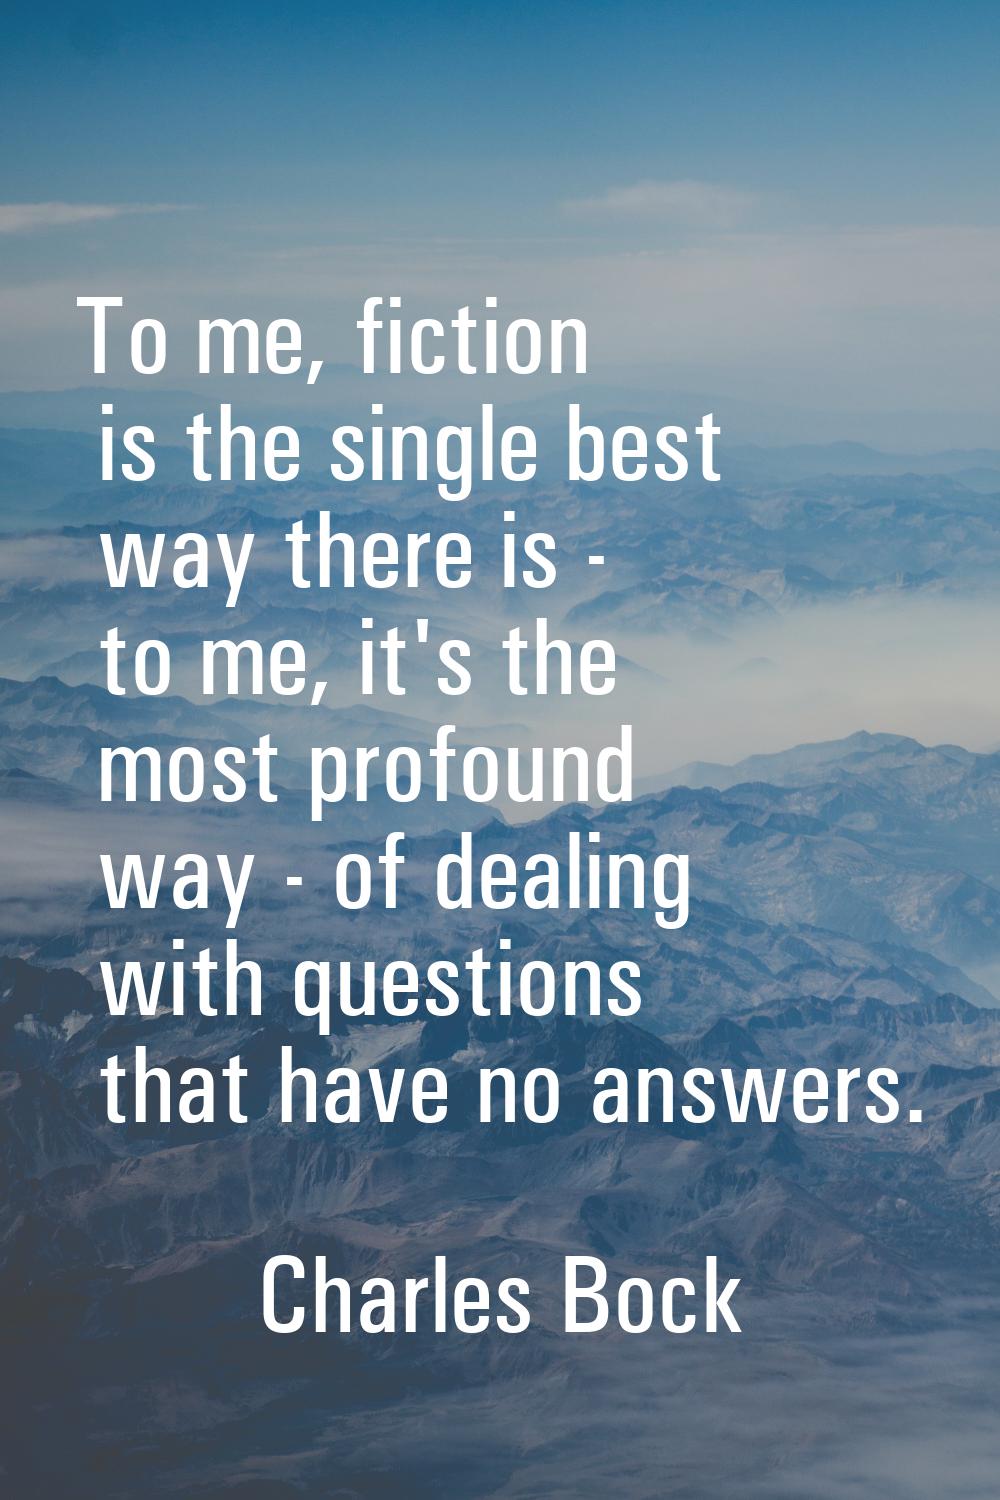 To me, fiction is the single best way there is - to me, it's the most profound way - of dealing wit